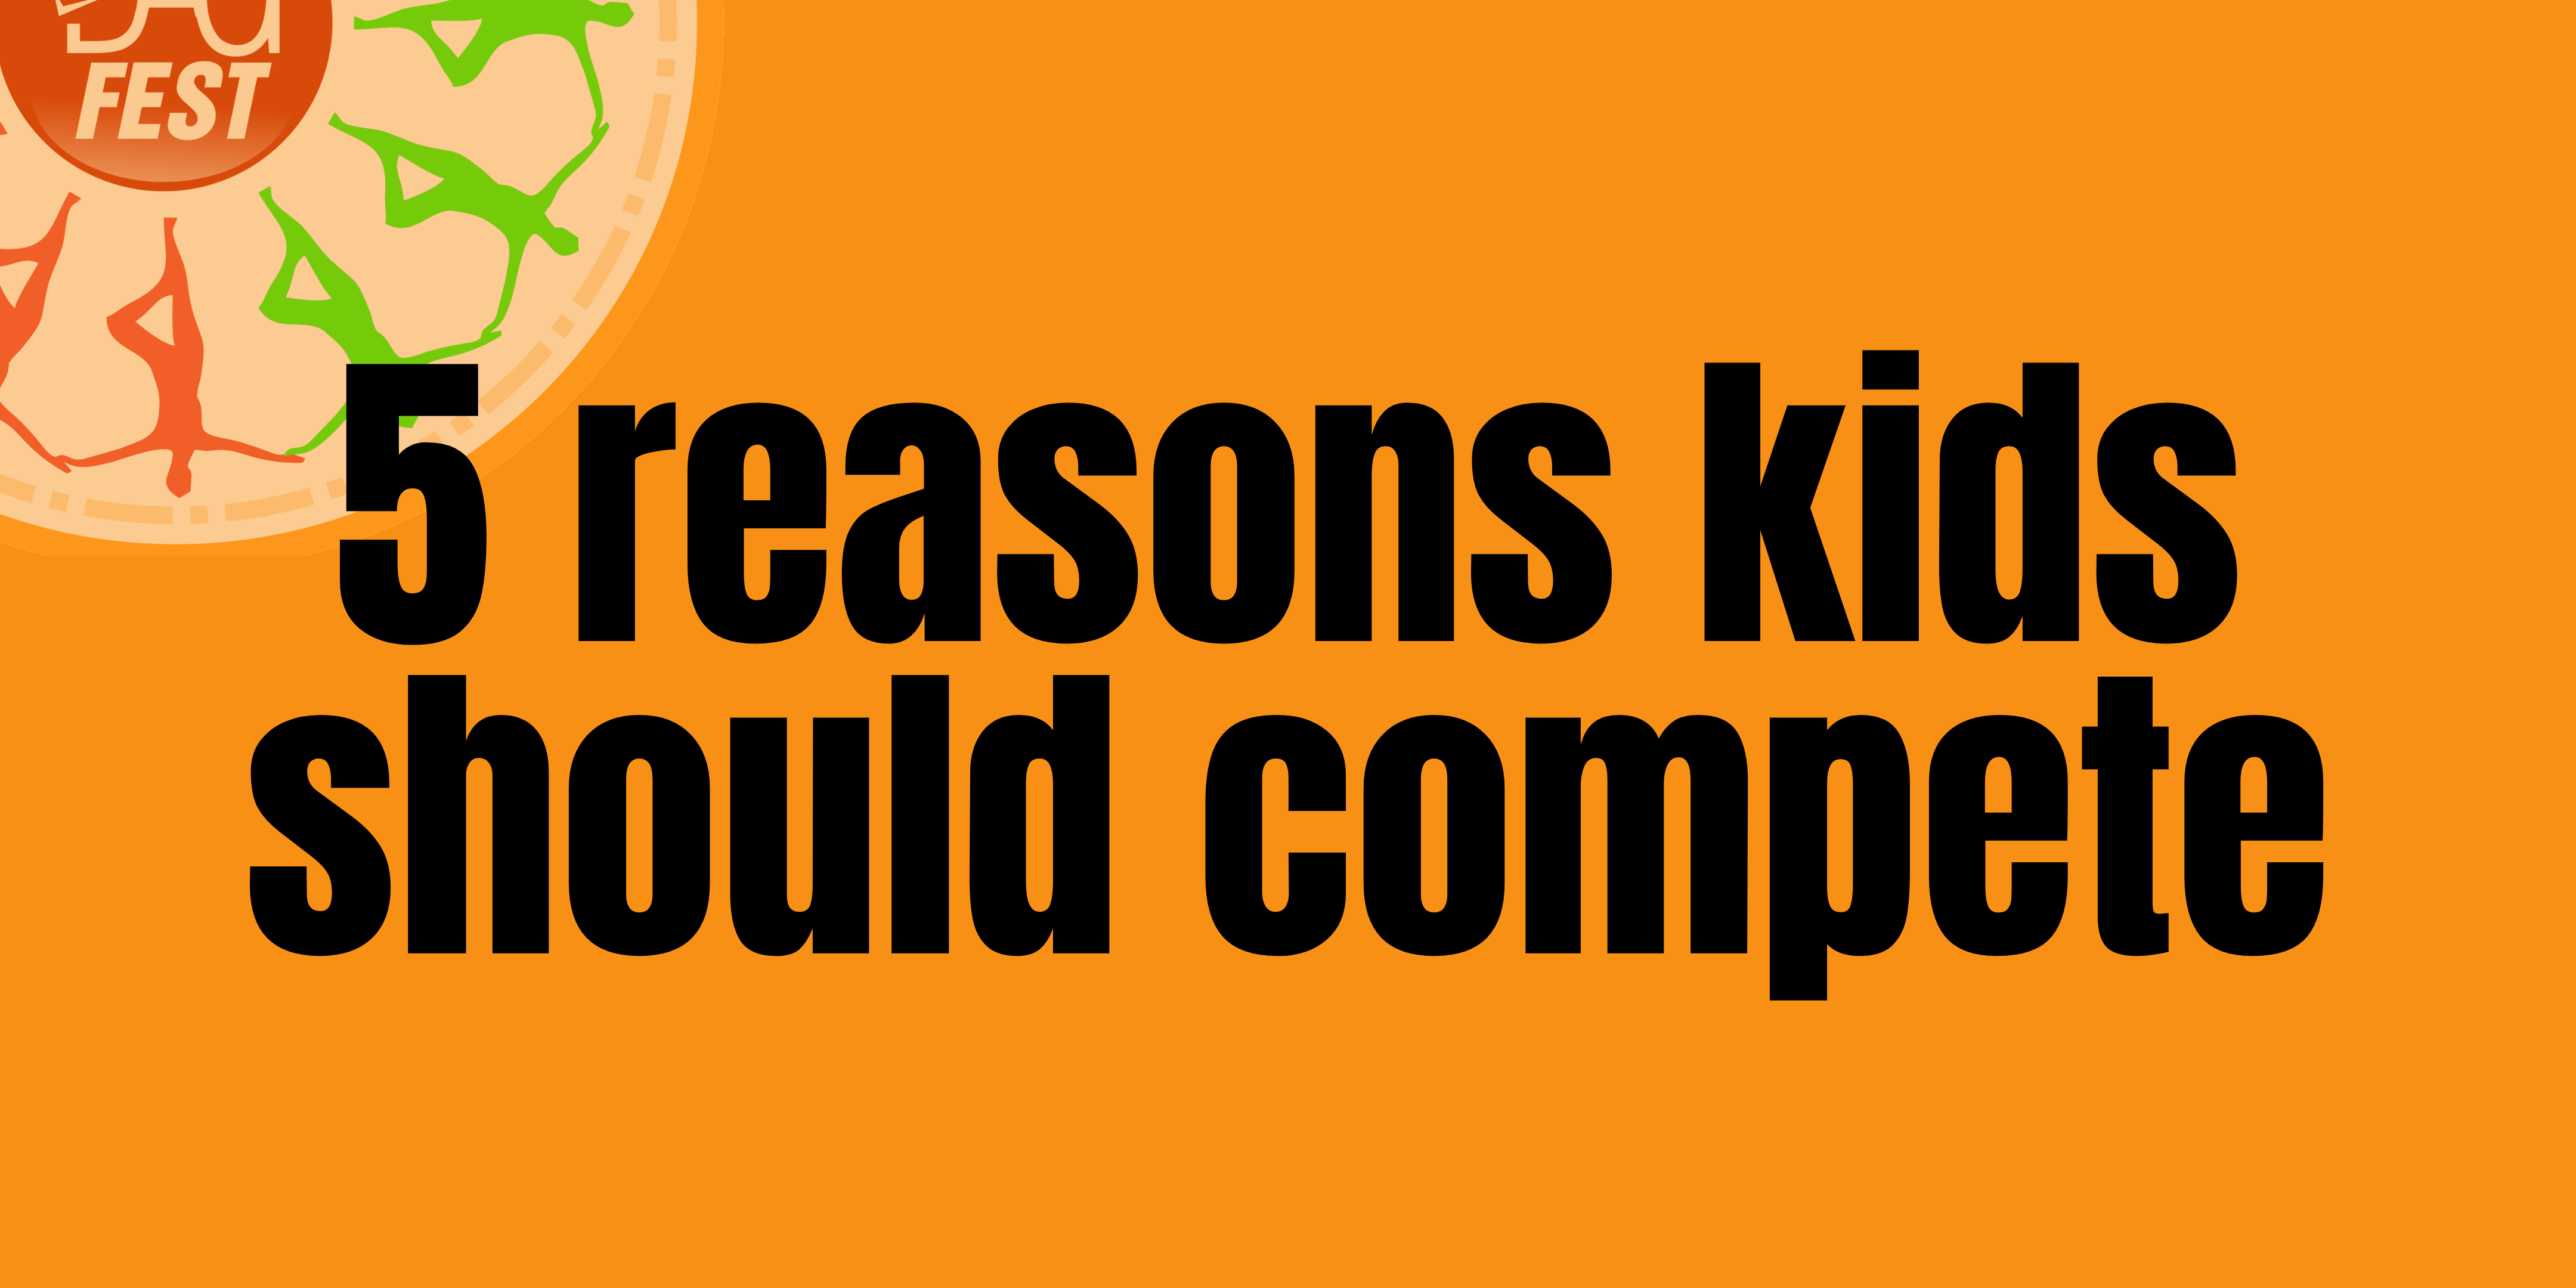 You are currently viewing 5 REASONS KIDS SHOULD COMPETE